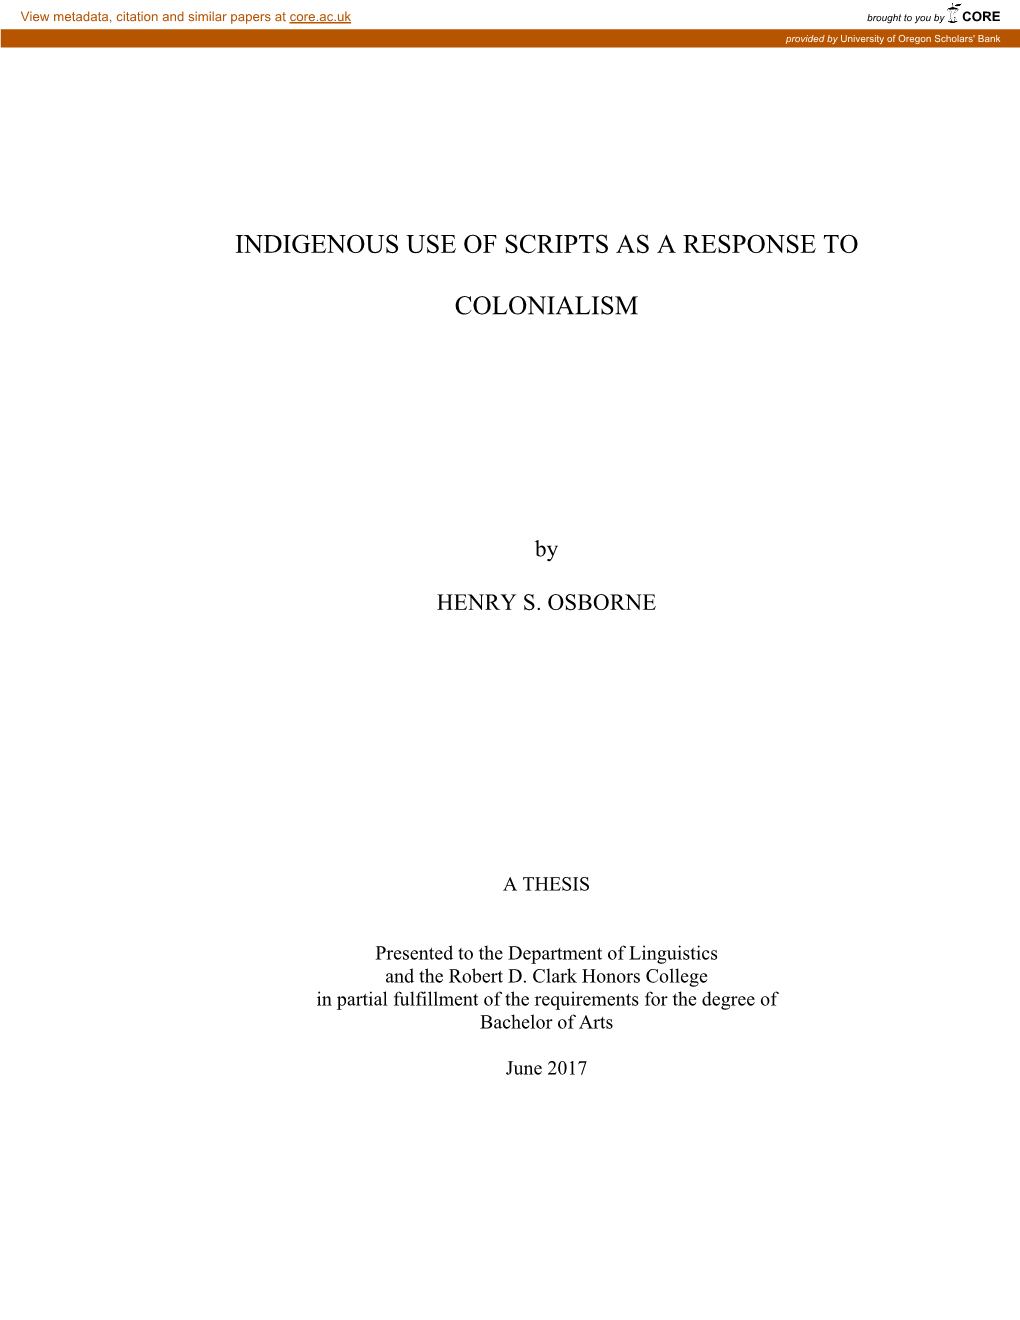 Indigenous Use of Scripts As a Response to Colonialism